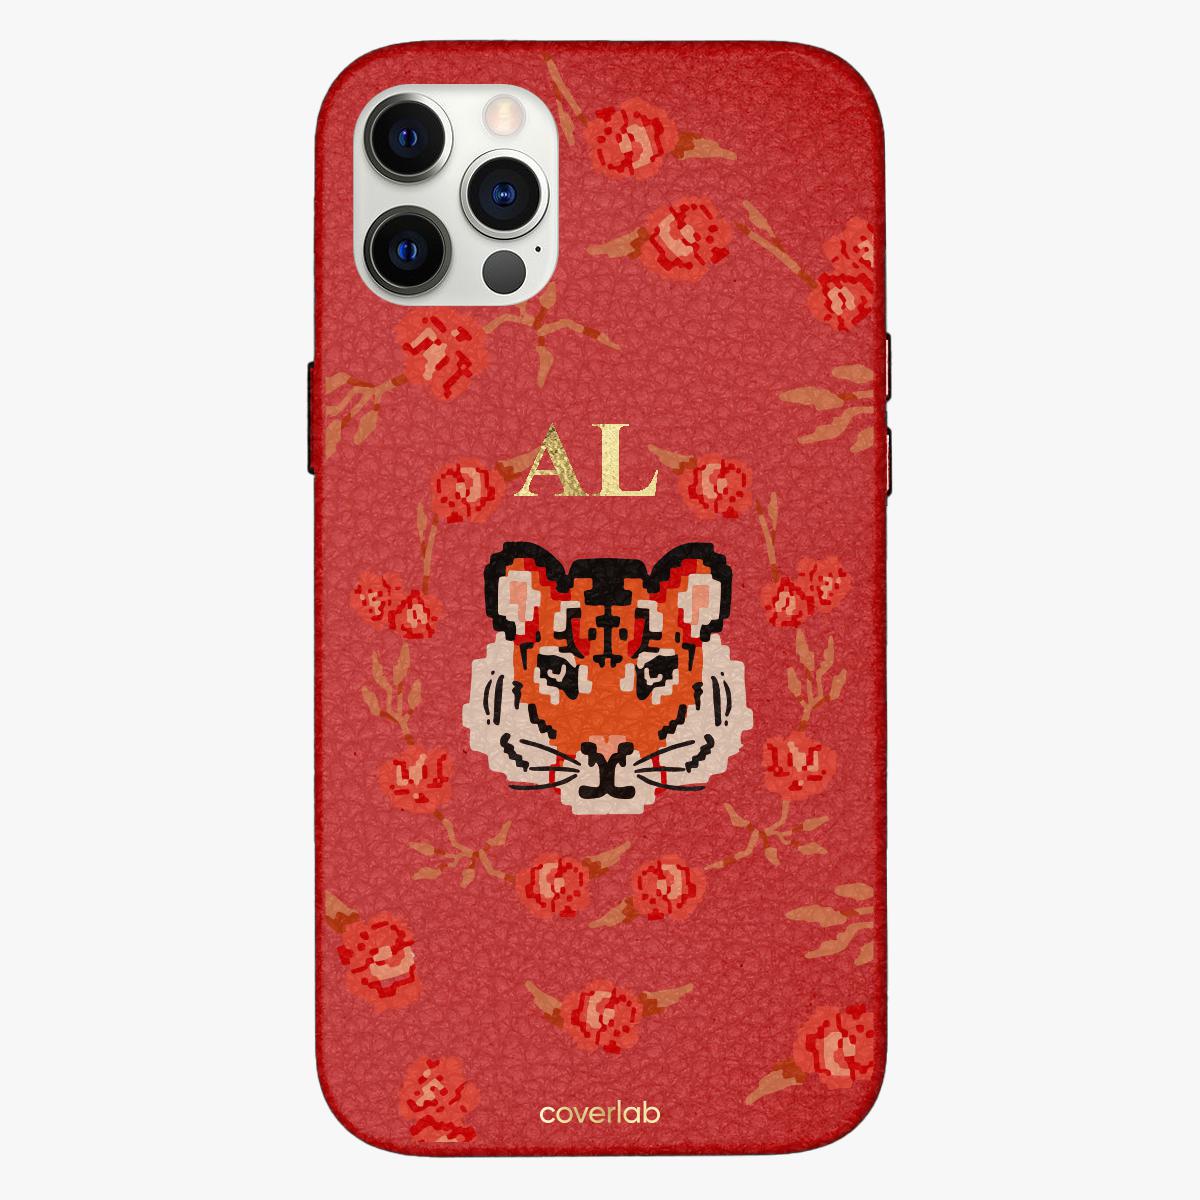 Tiger and Flowers Personalised Leather iPhone Case